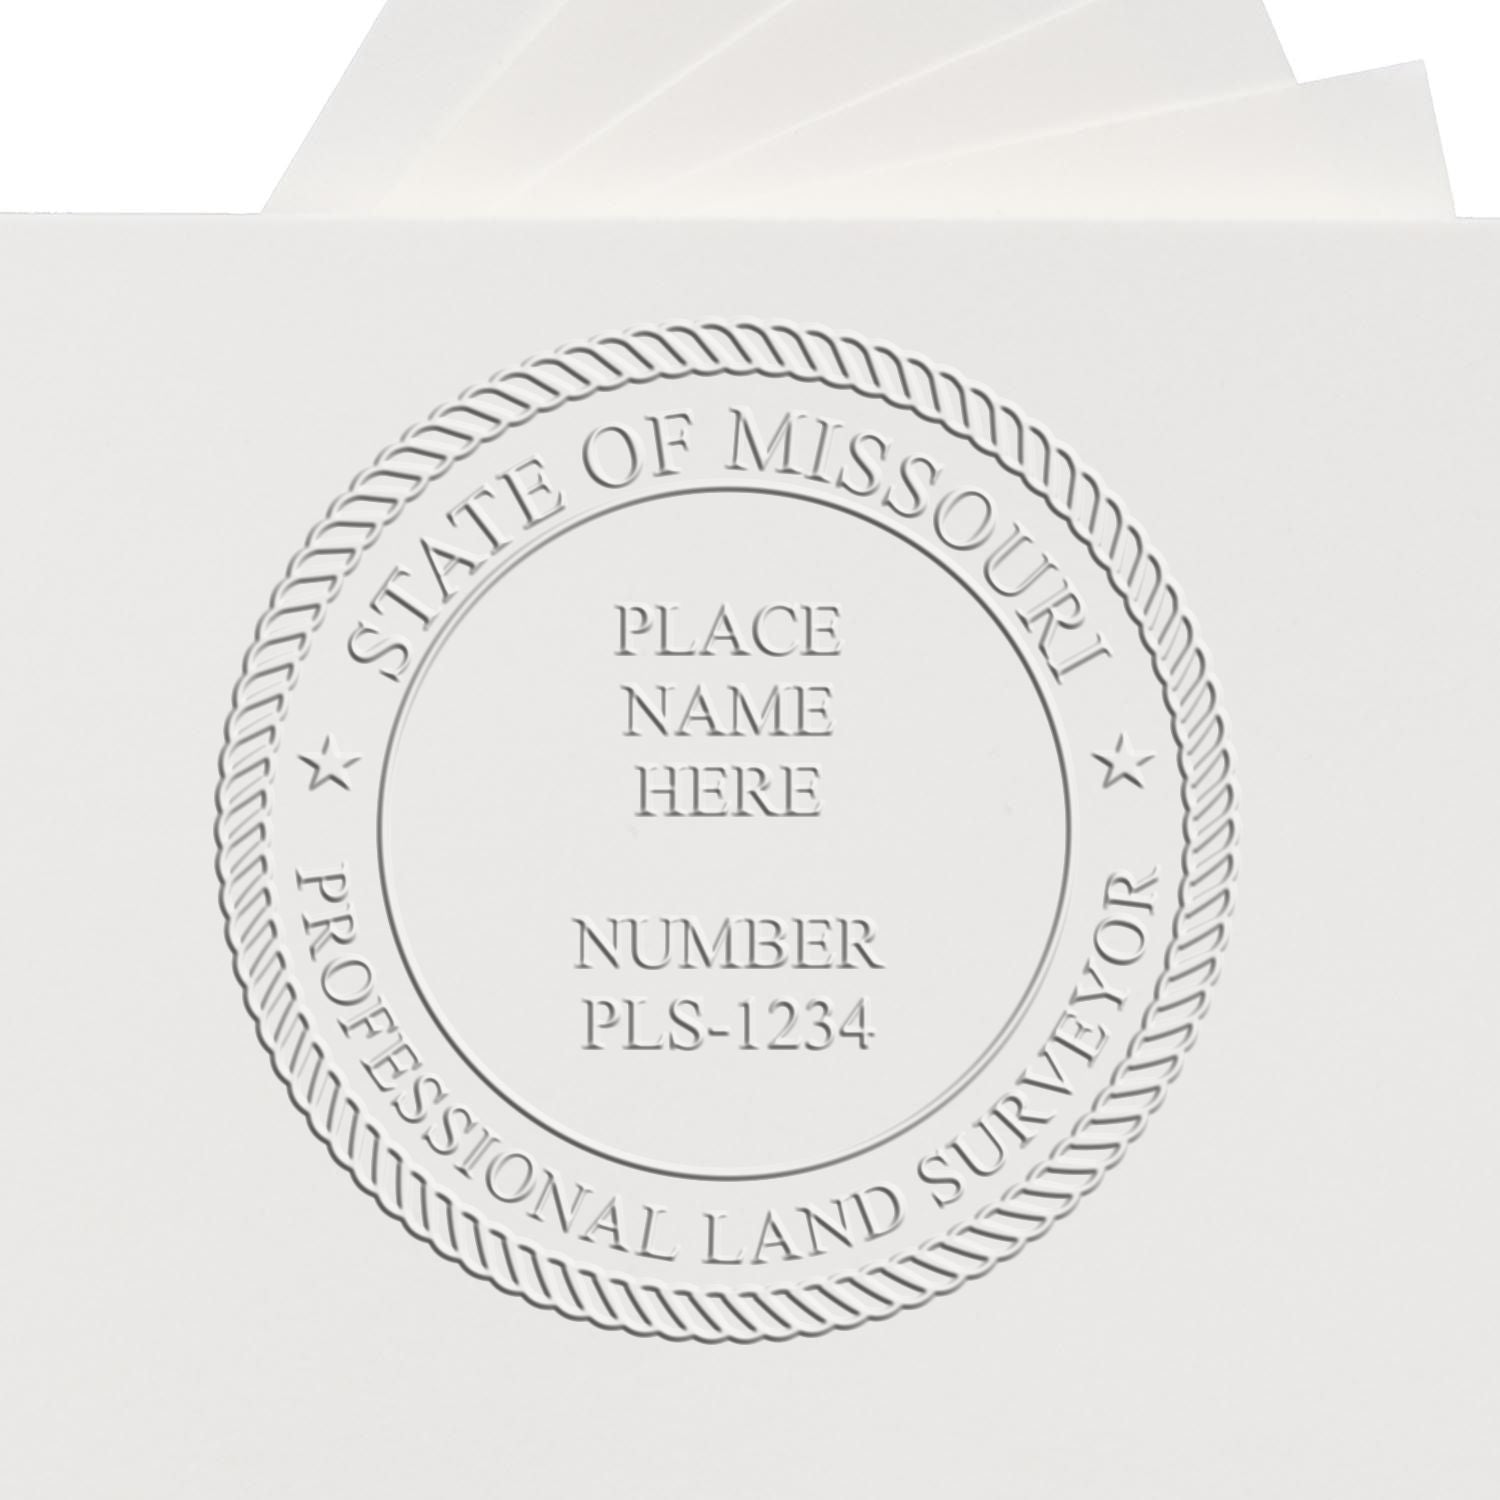 The main image for the Handheld Missouri Land Surveyor Seal depicting a sample of the imprint and electronic files